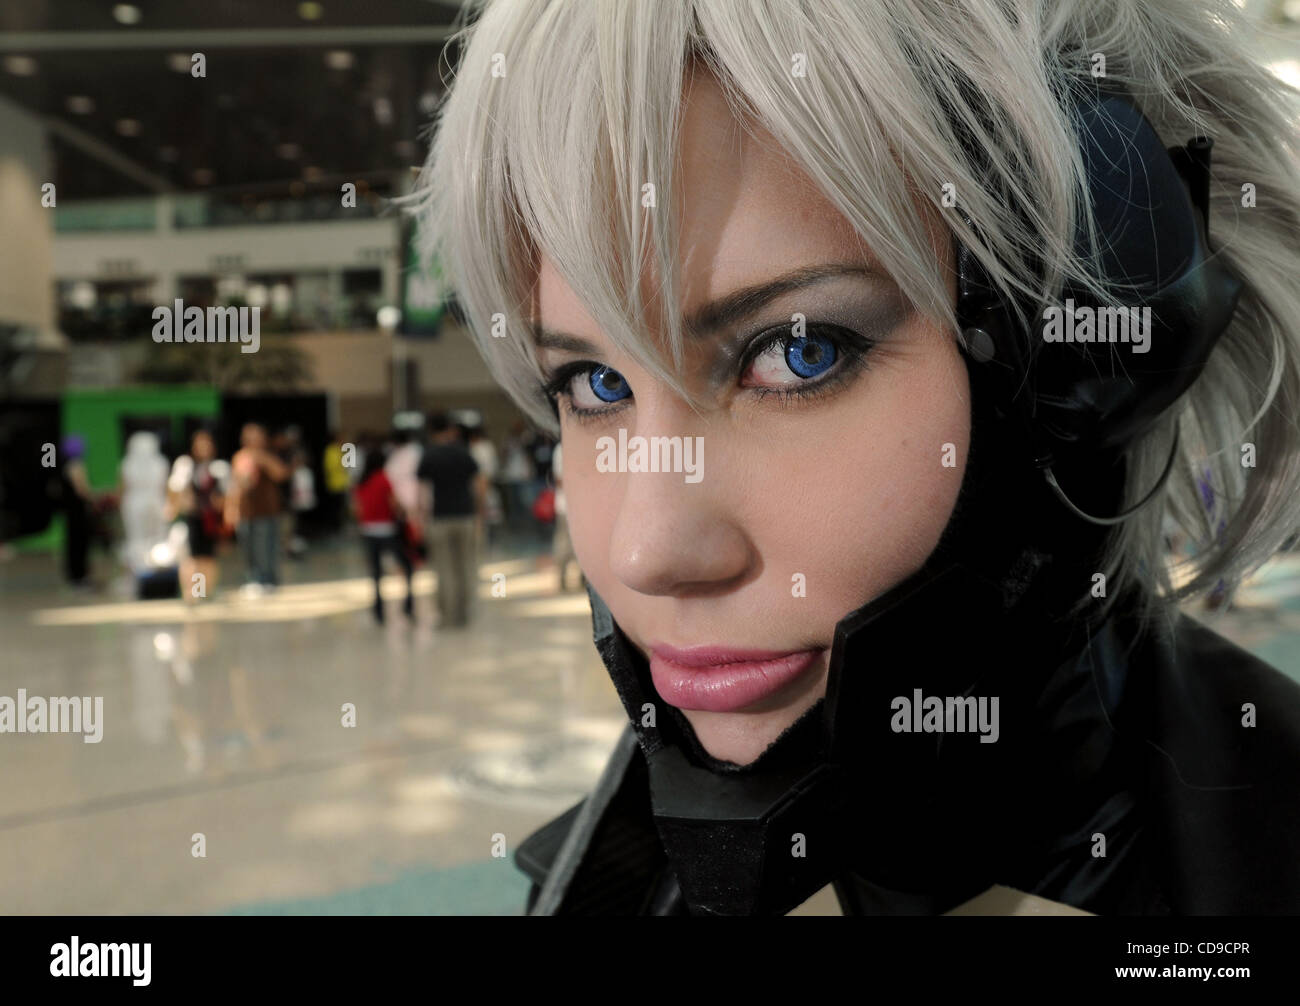 Jul 02, 2010 - Los Angeles, California, USA - Crystal Graziano (20) as Raiden from Metal Gear Solid 4. Thousands of Japanese animation fans donned, costumes, wigs and make-up for North Americas largest anime and manga event at the 2010 Anime Expo at the Los Angeles Convention Center (Credit Image: © Stock Photo